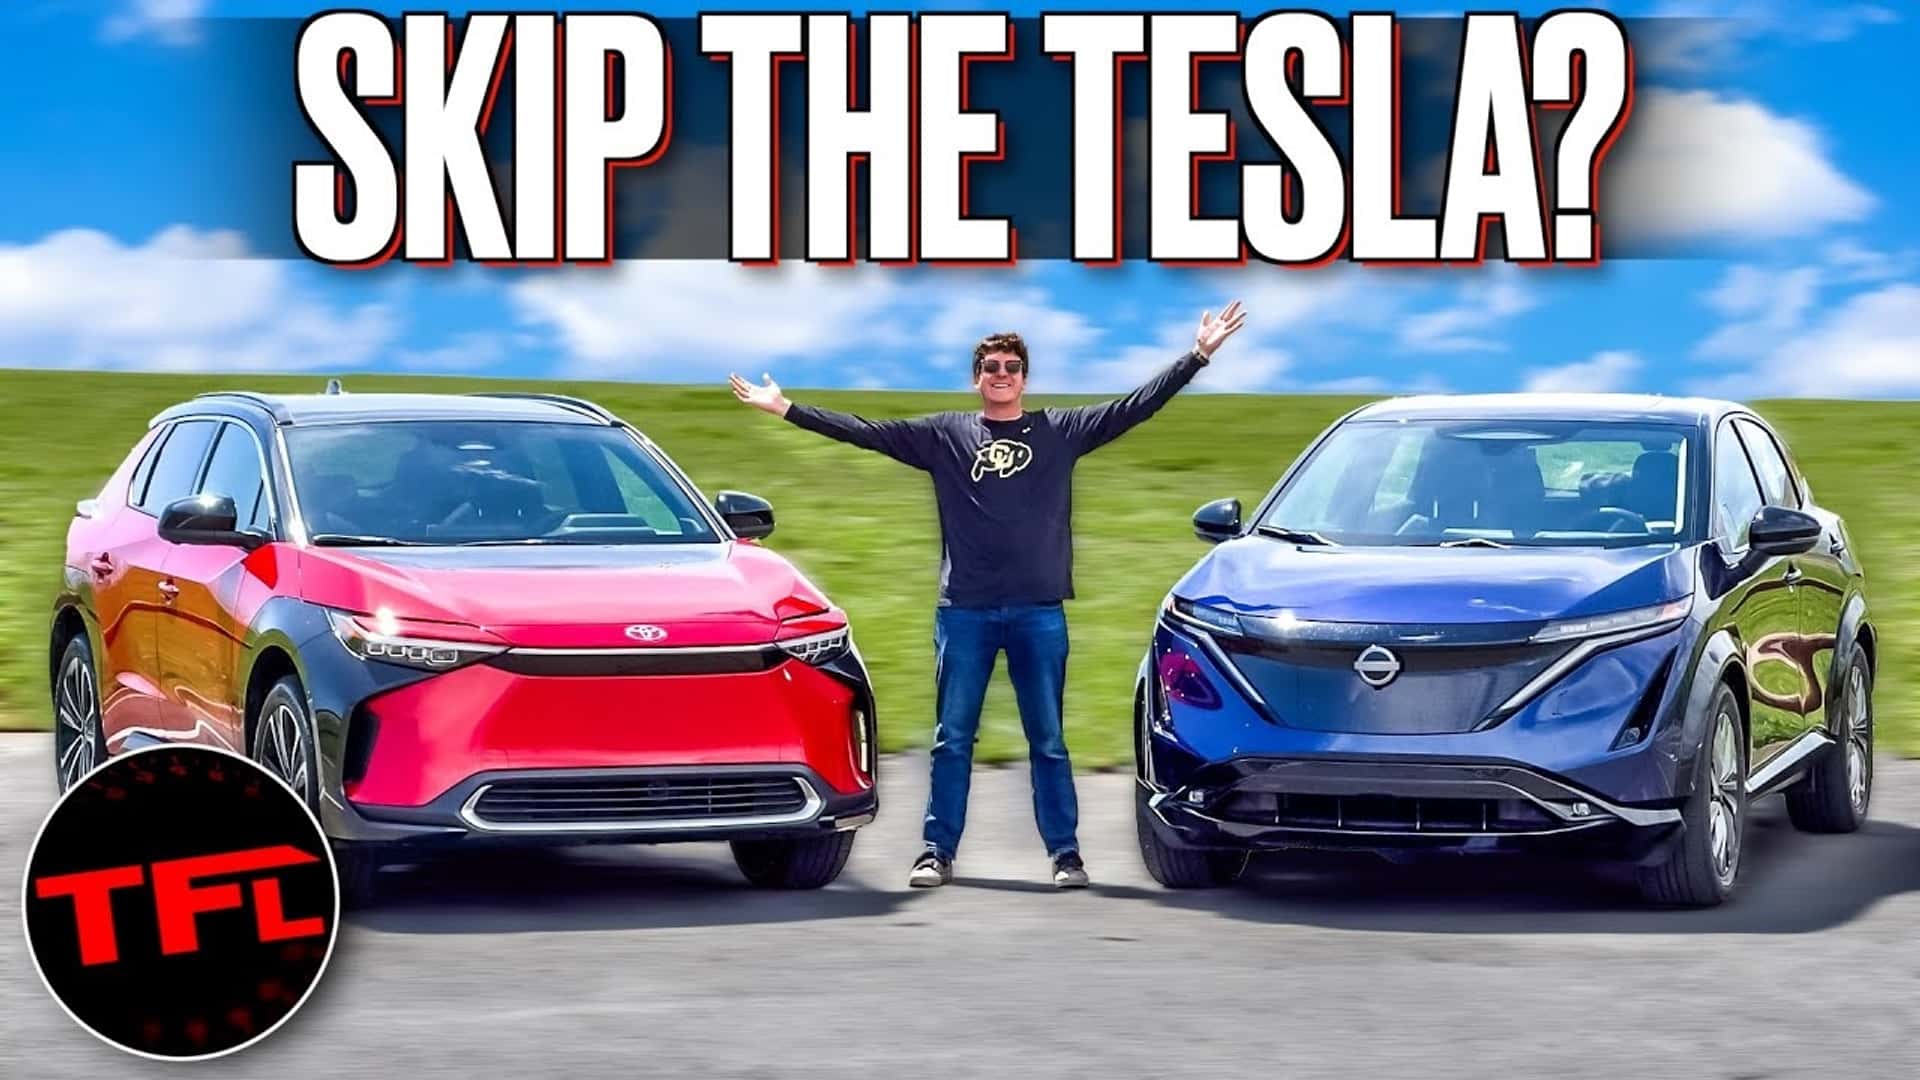 android, turned off by tesla? consider a nissan ariya or toyota bz4x